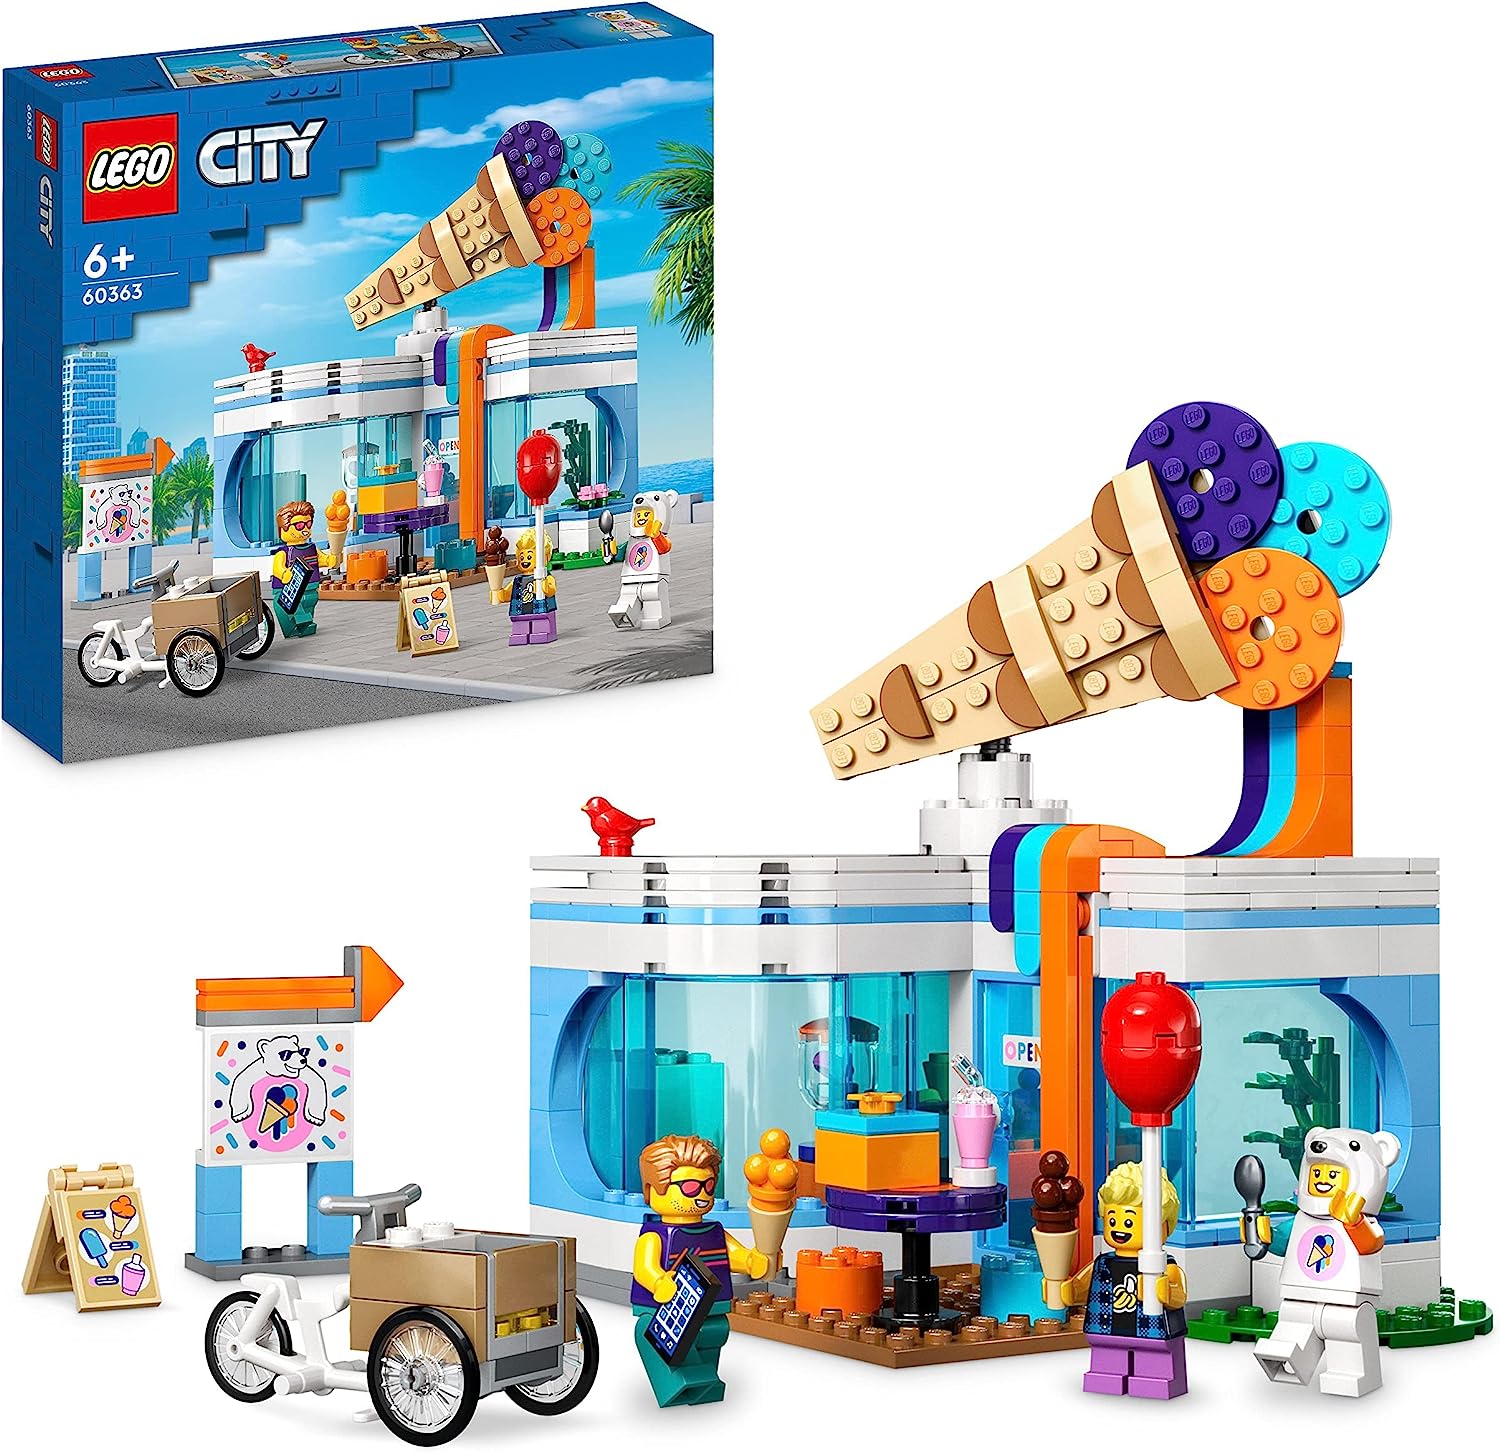 LEGO 60363 City Ice Cream Parlor, Toy Shop for Children from 6 Years, Set of 3 Mini Figures With Fun Accessories and a Cargo Wheel, Birthday Gift for Boys and Girls